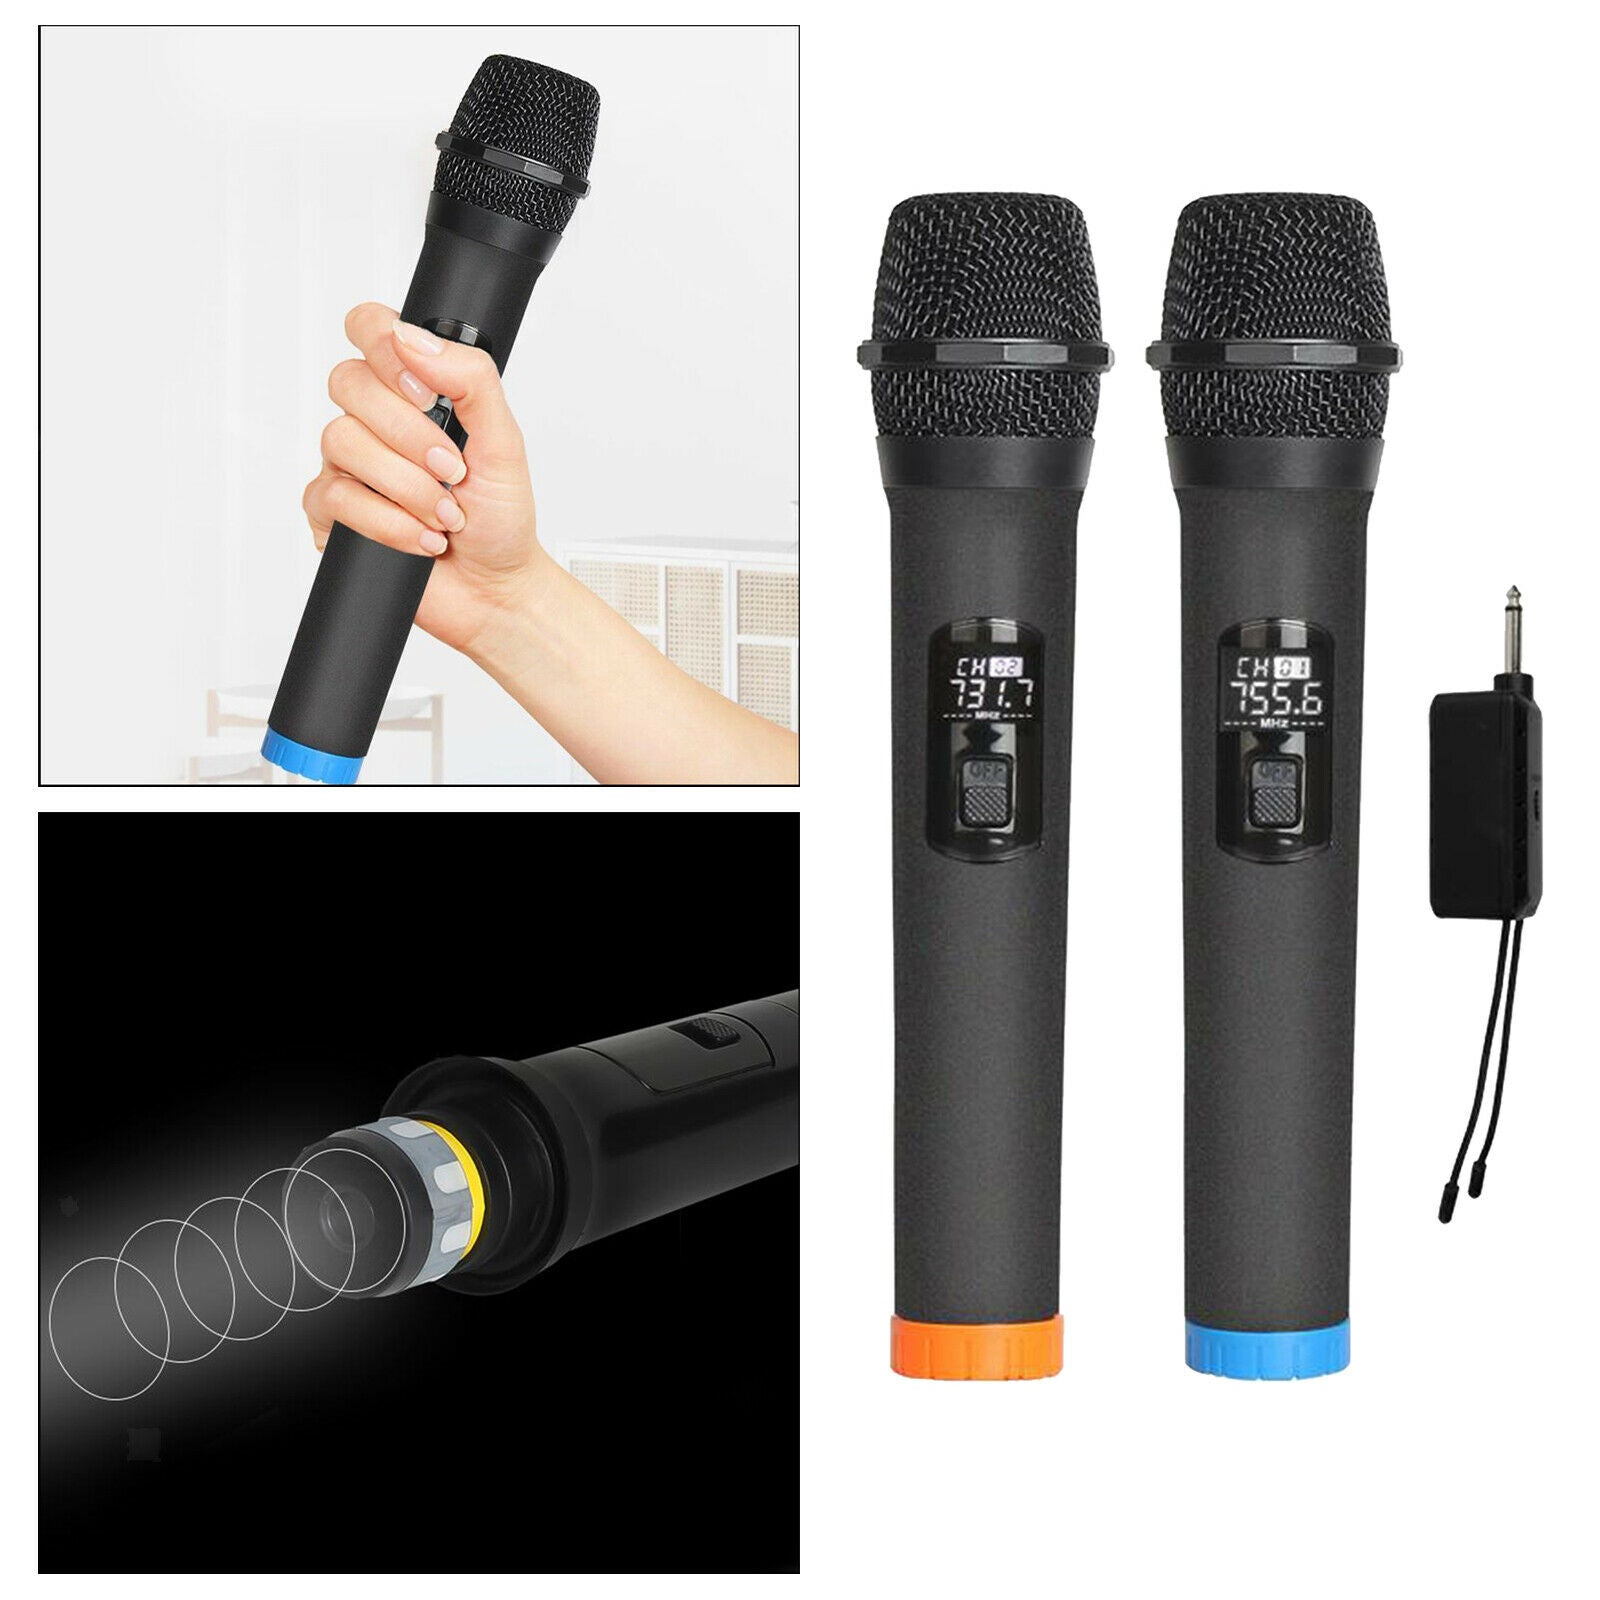 2x Wireless Microphone, VHF Cordless Handheld Mic System with Rechargeable